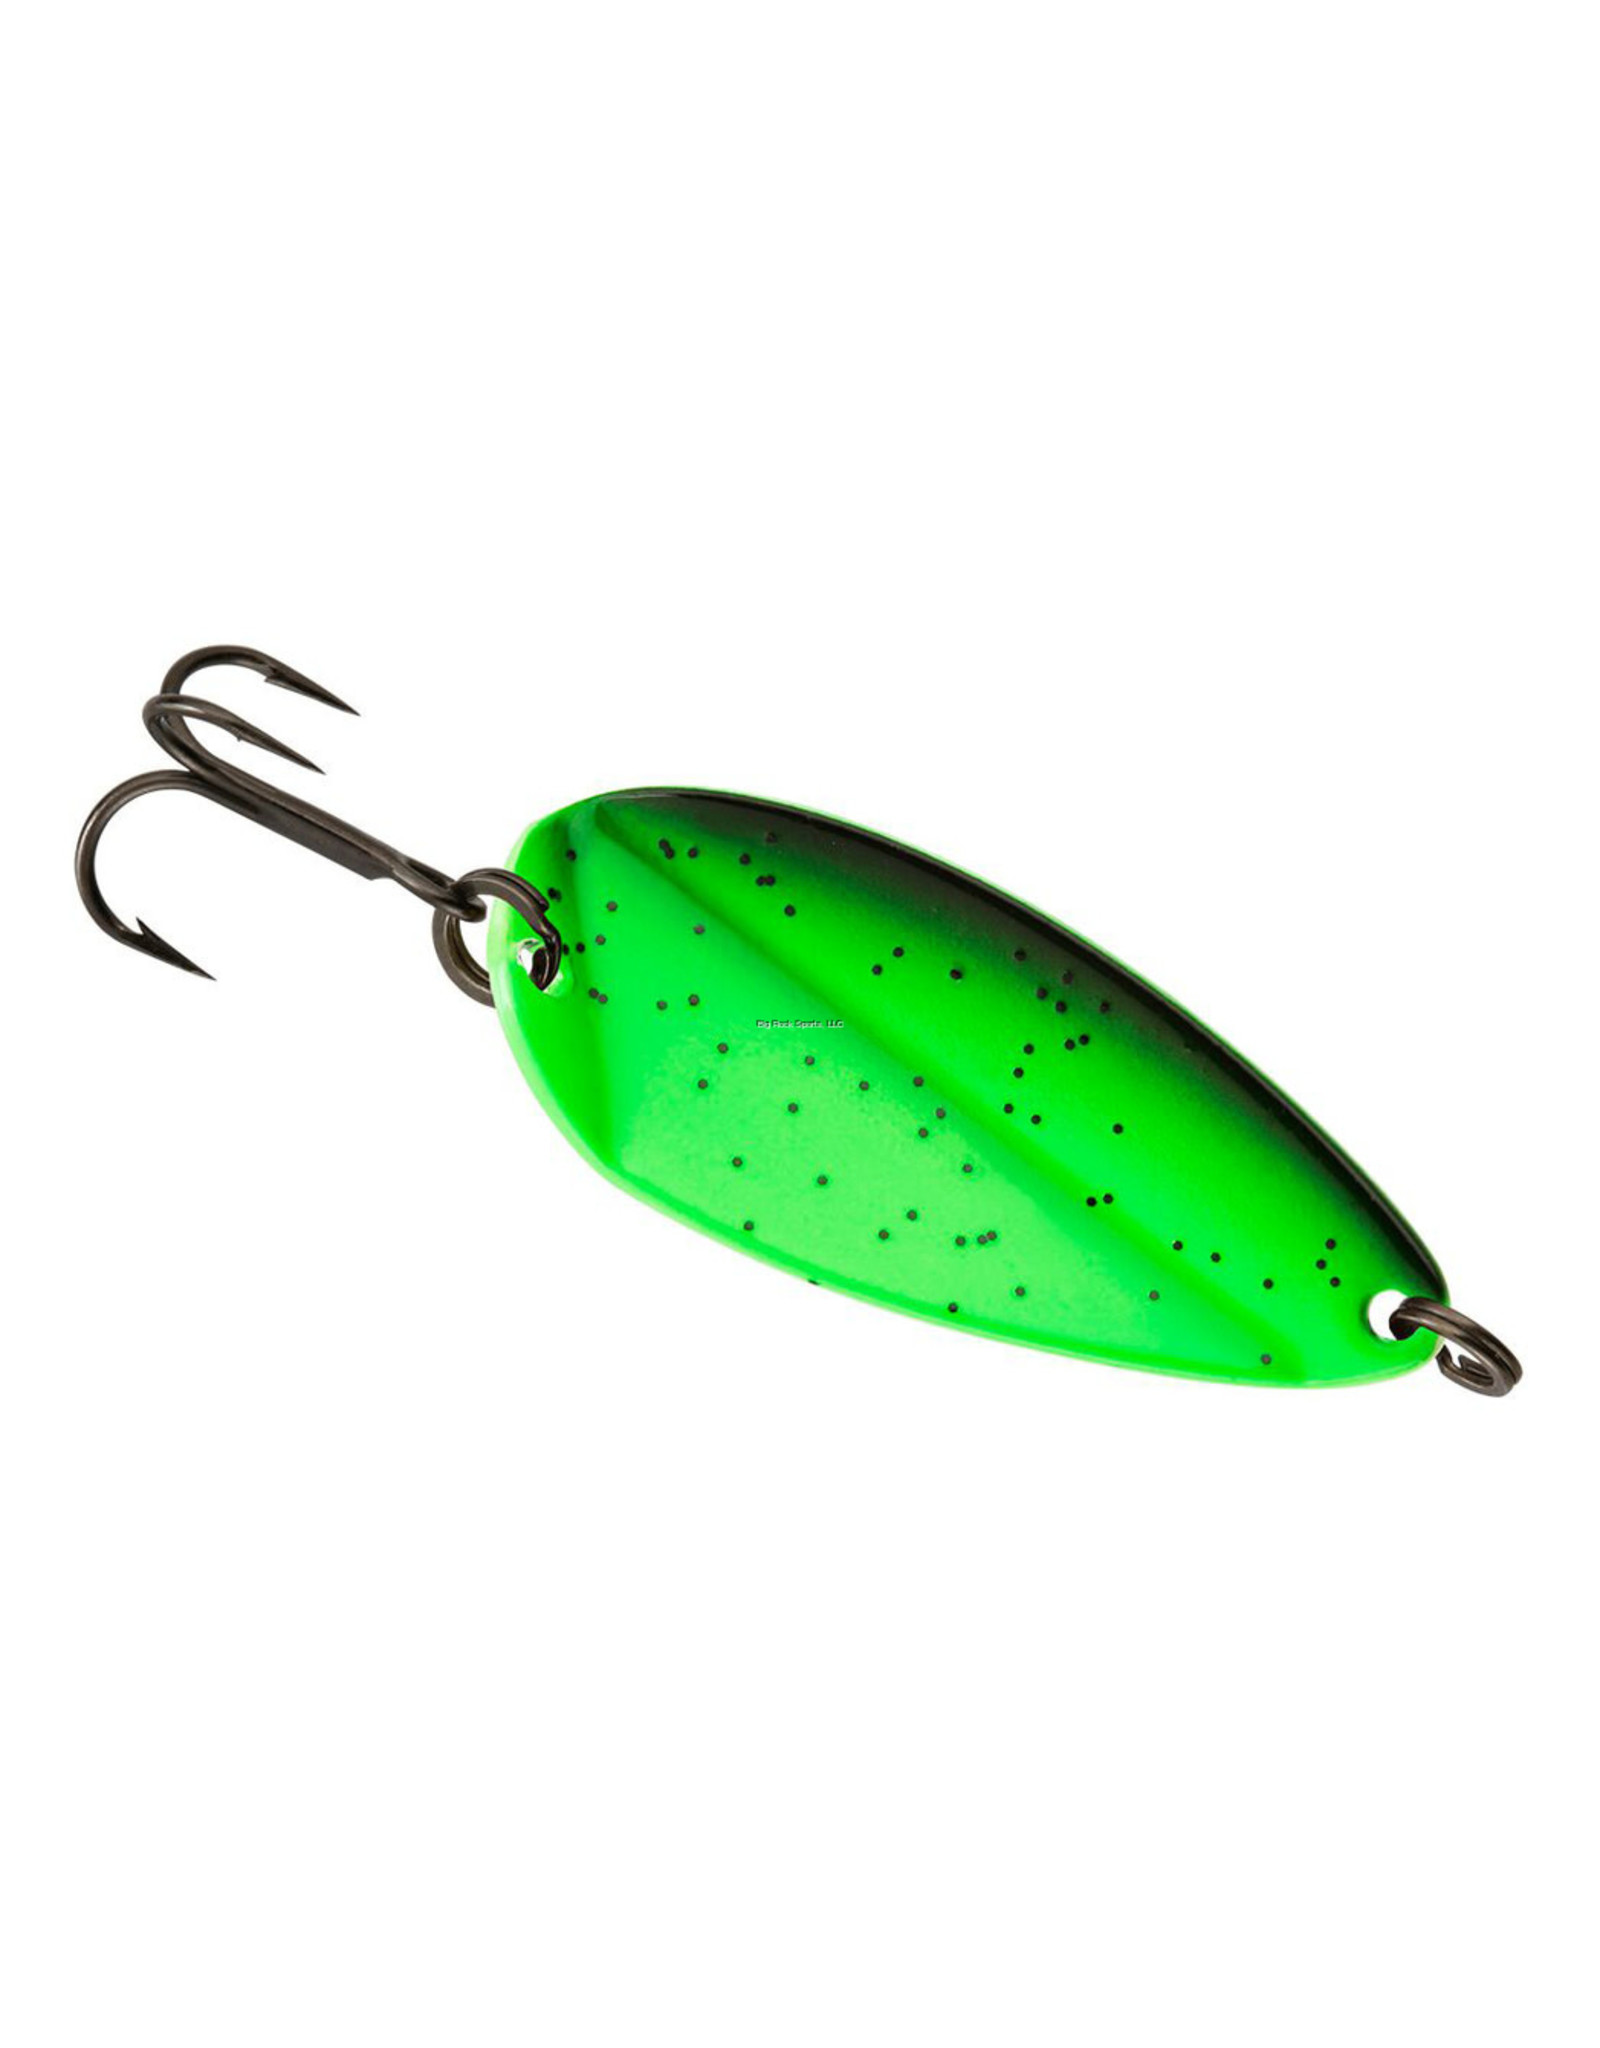 13 Fishing 13 Fishing OB-RP8 Oragami Blade, Flutter Spoon, 1/8 oz, Radioactive Pickle